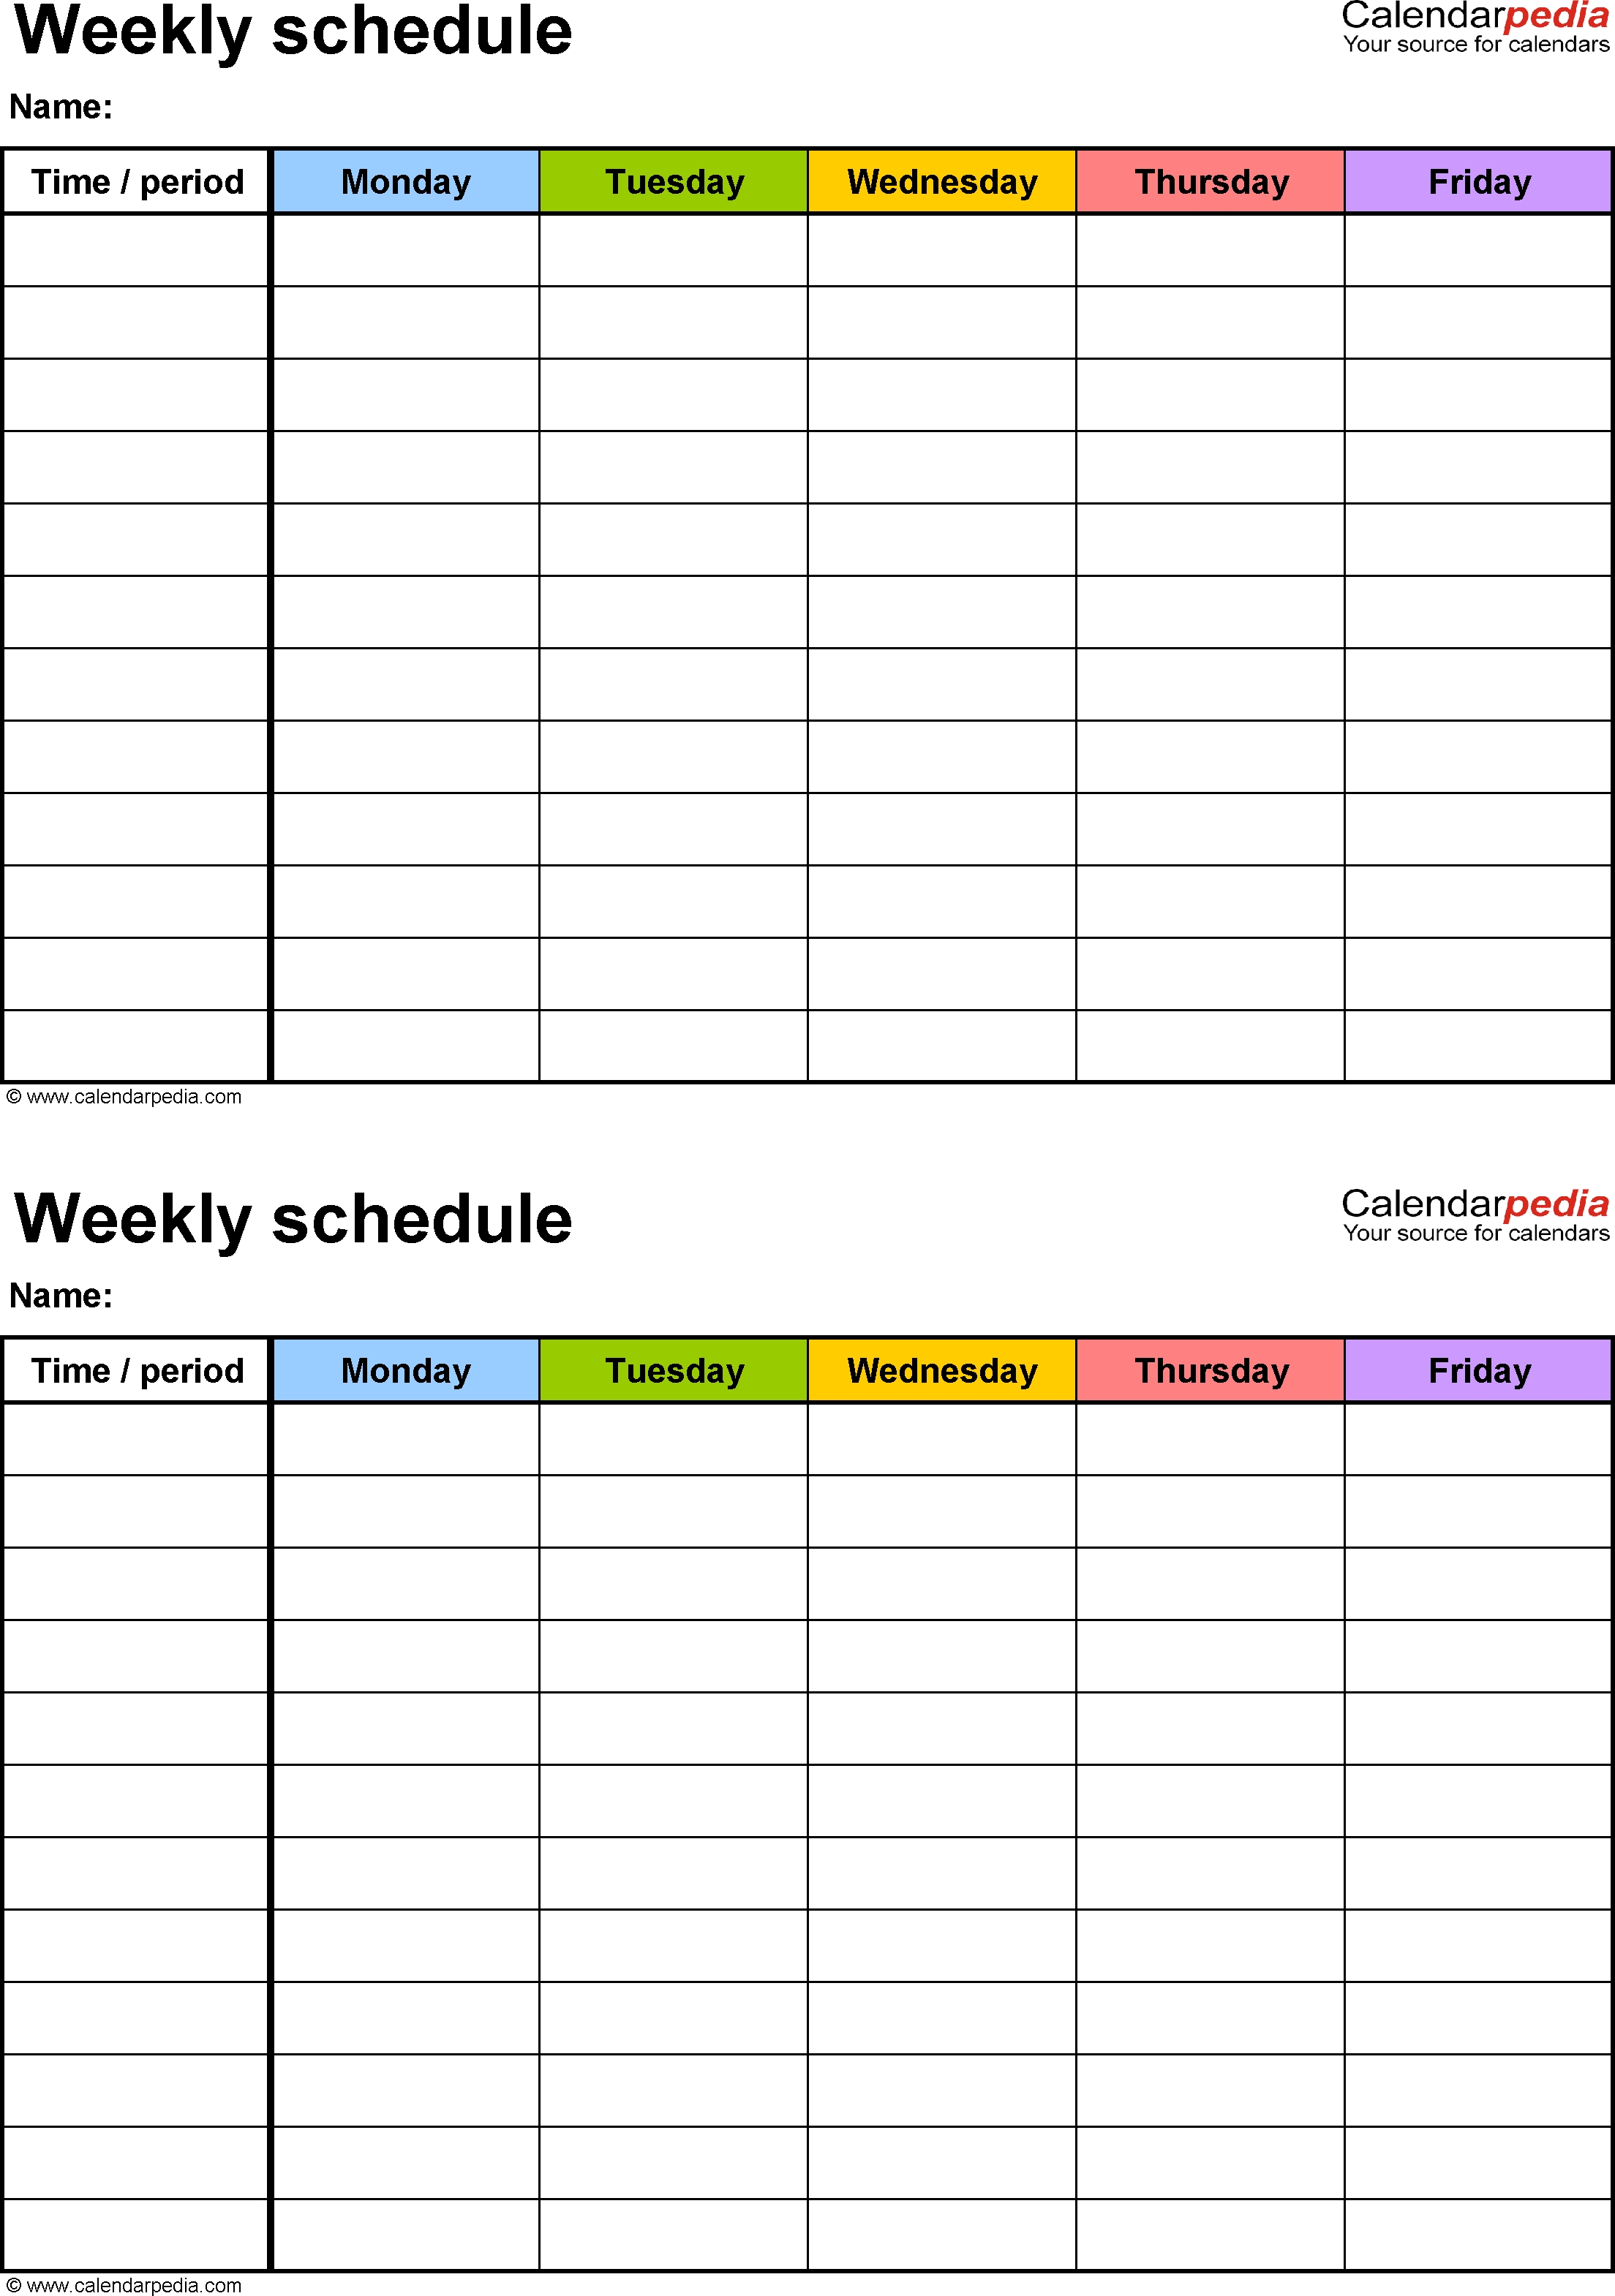 Free Weekly Schedule Templates For Word - 18 Templates Extraordinary Monday Through Friday Word Calendar